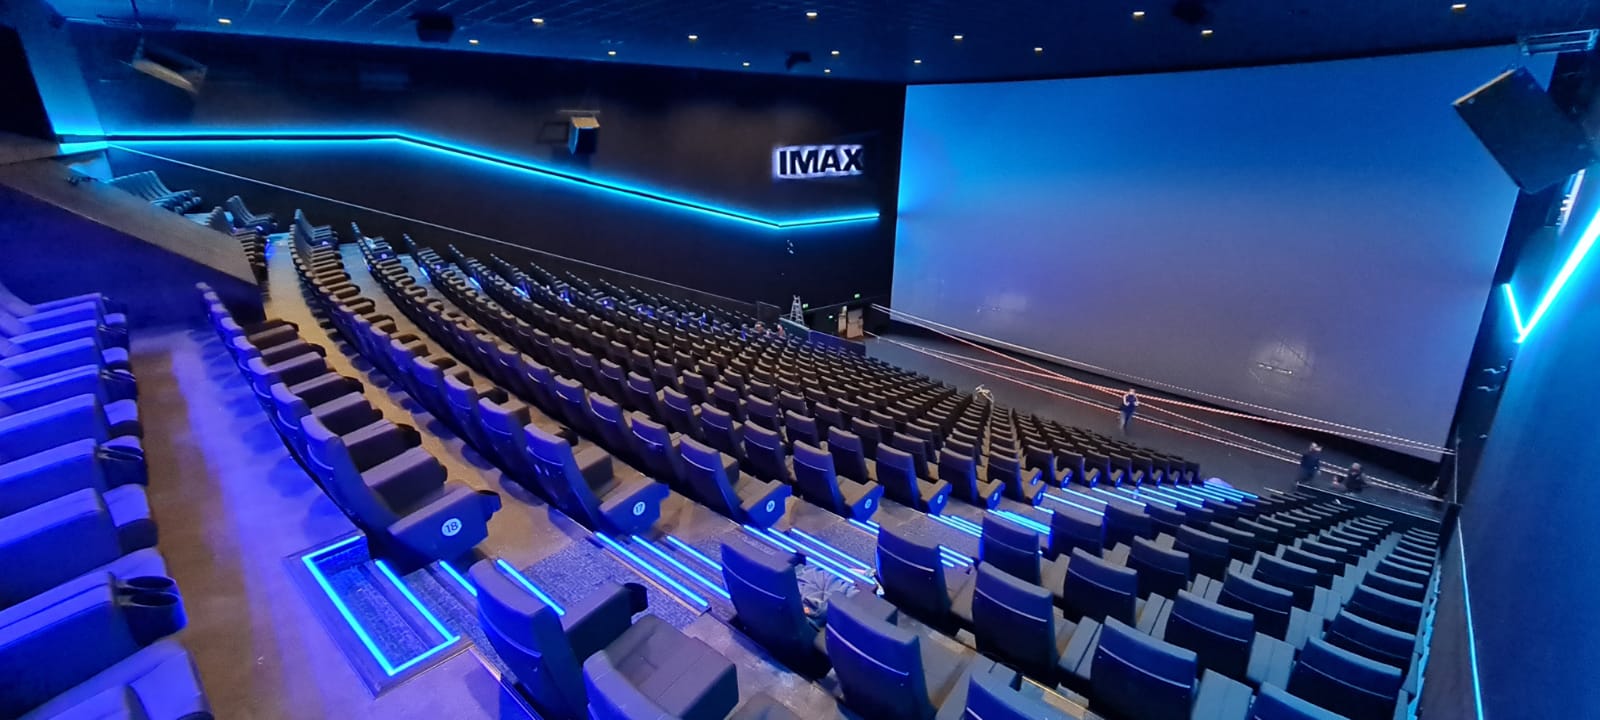 The Evolution of IMAX Technology: From 15/70 to Laser Projection